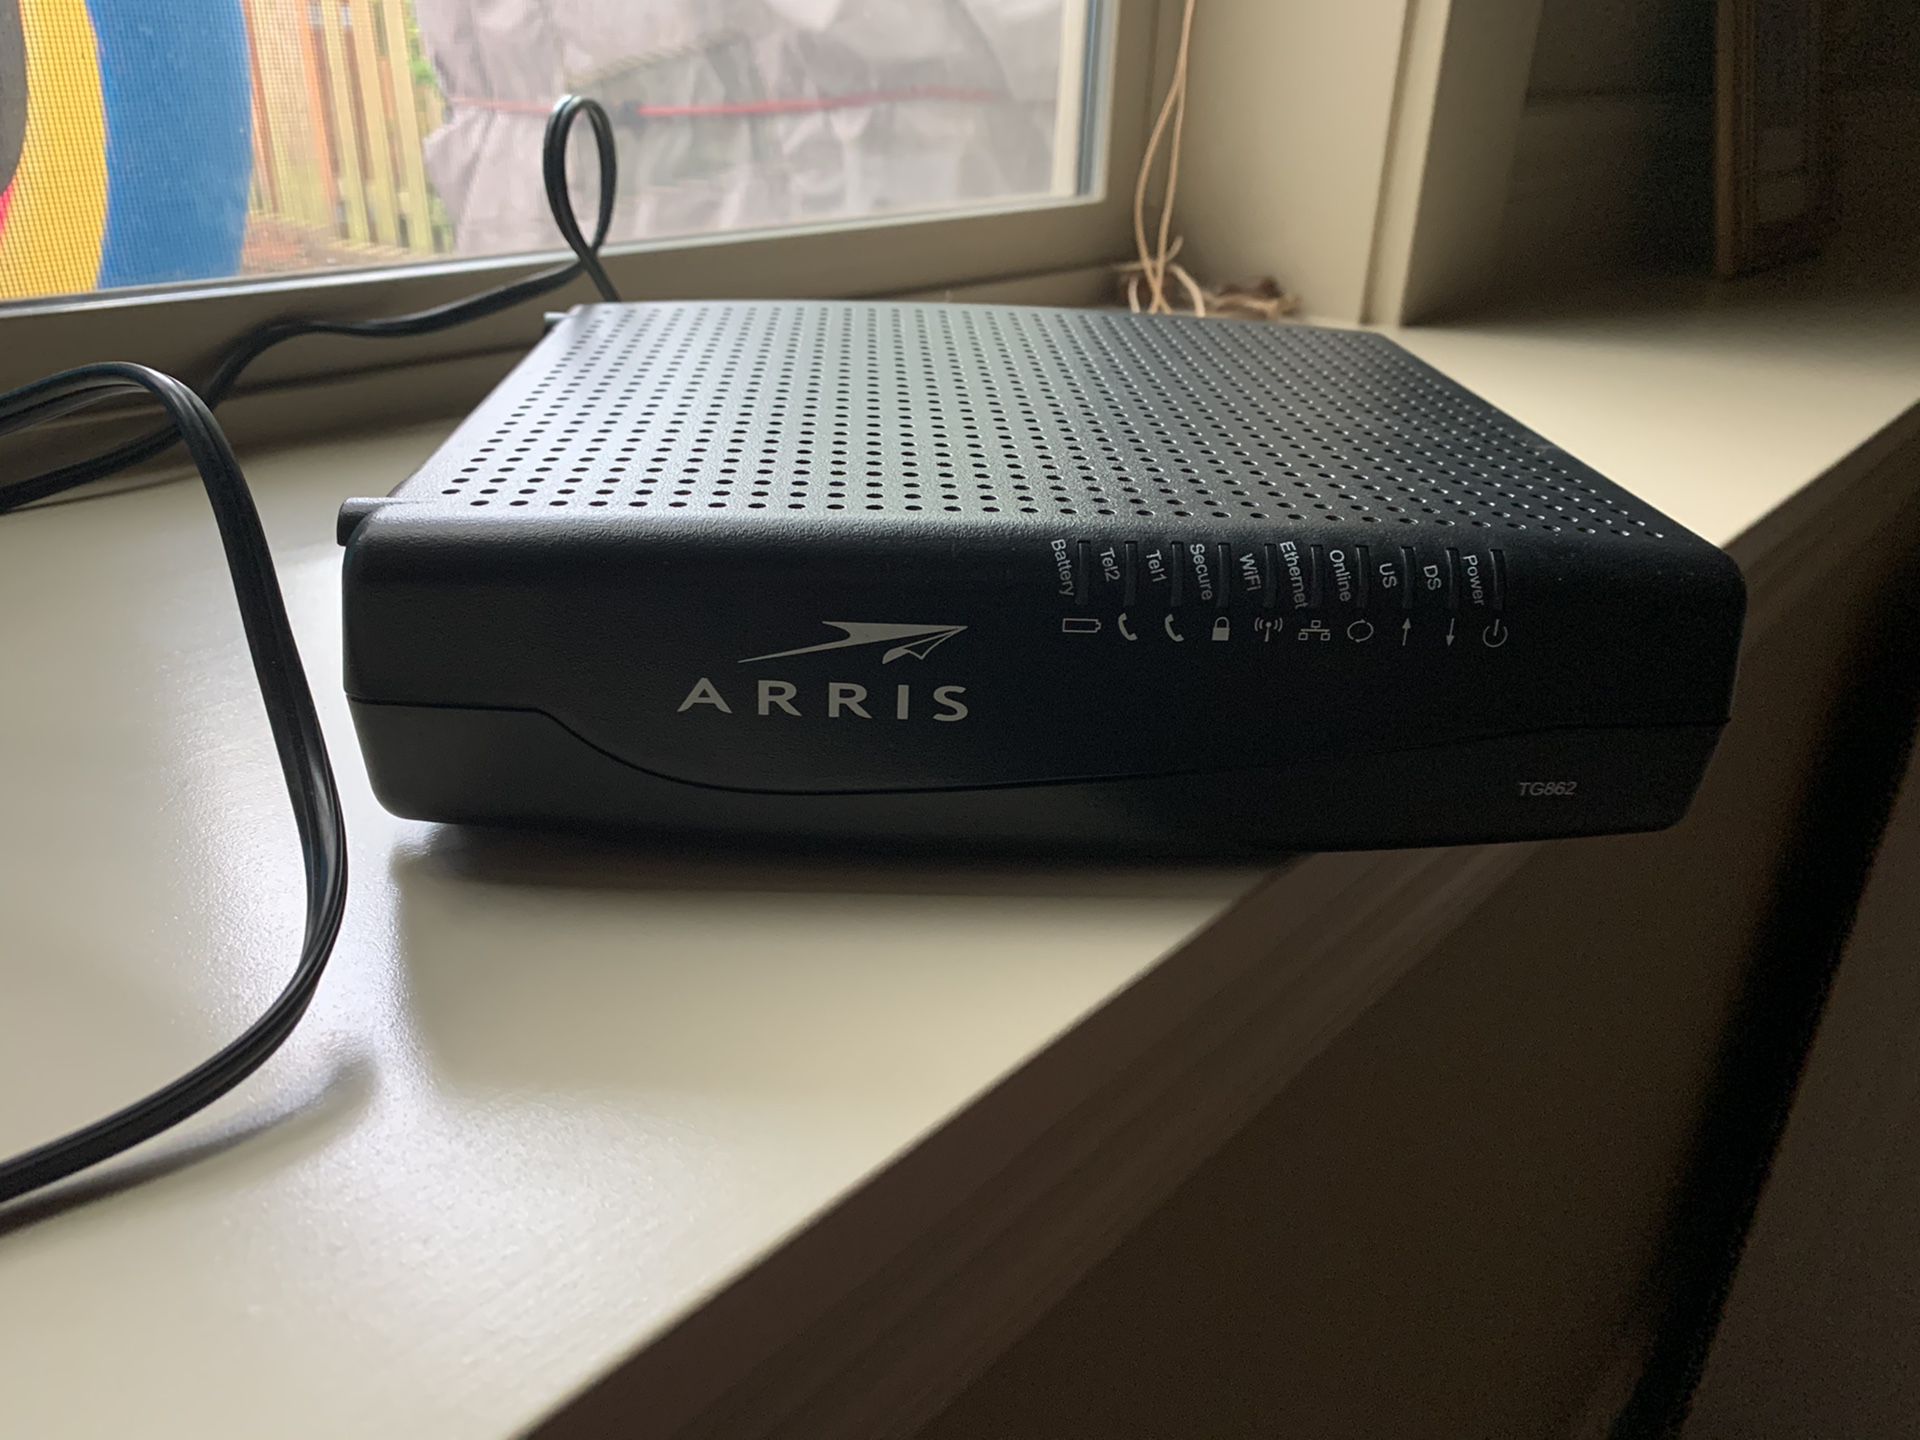 Arris TG862g xfinity DOCSIS 3.0 cable model with Wi-Fi